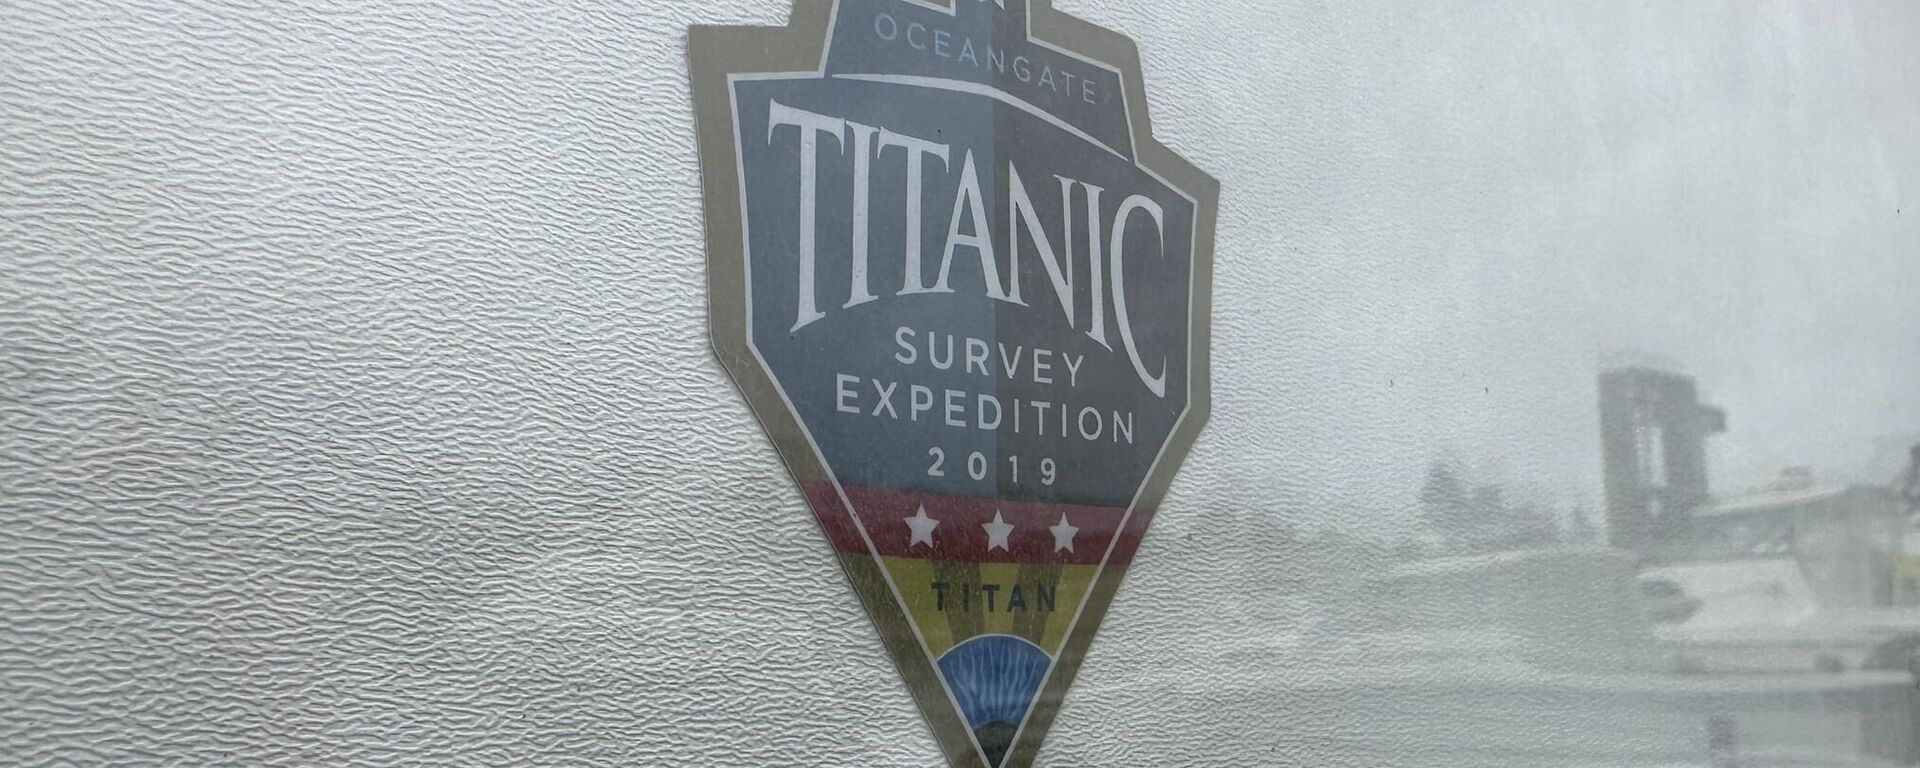 The logo for an OceanGate Expeditions 2019 Titanic expedition is seen on a marine industrial warehouse office door in Everett, Wash., Tuesday, June 20, 2023.  - Sputnik International, 1920, 21.06.2023